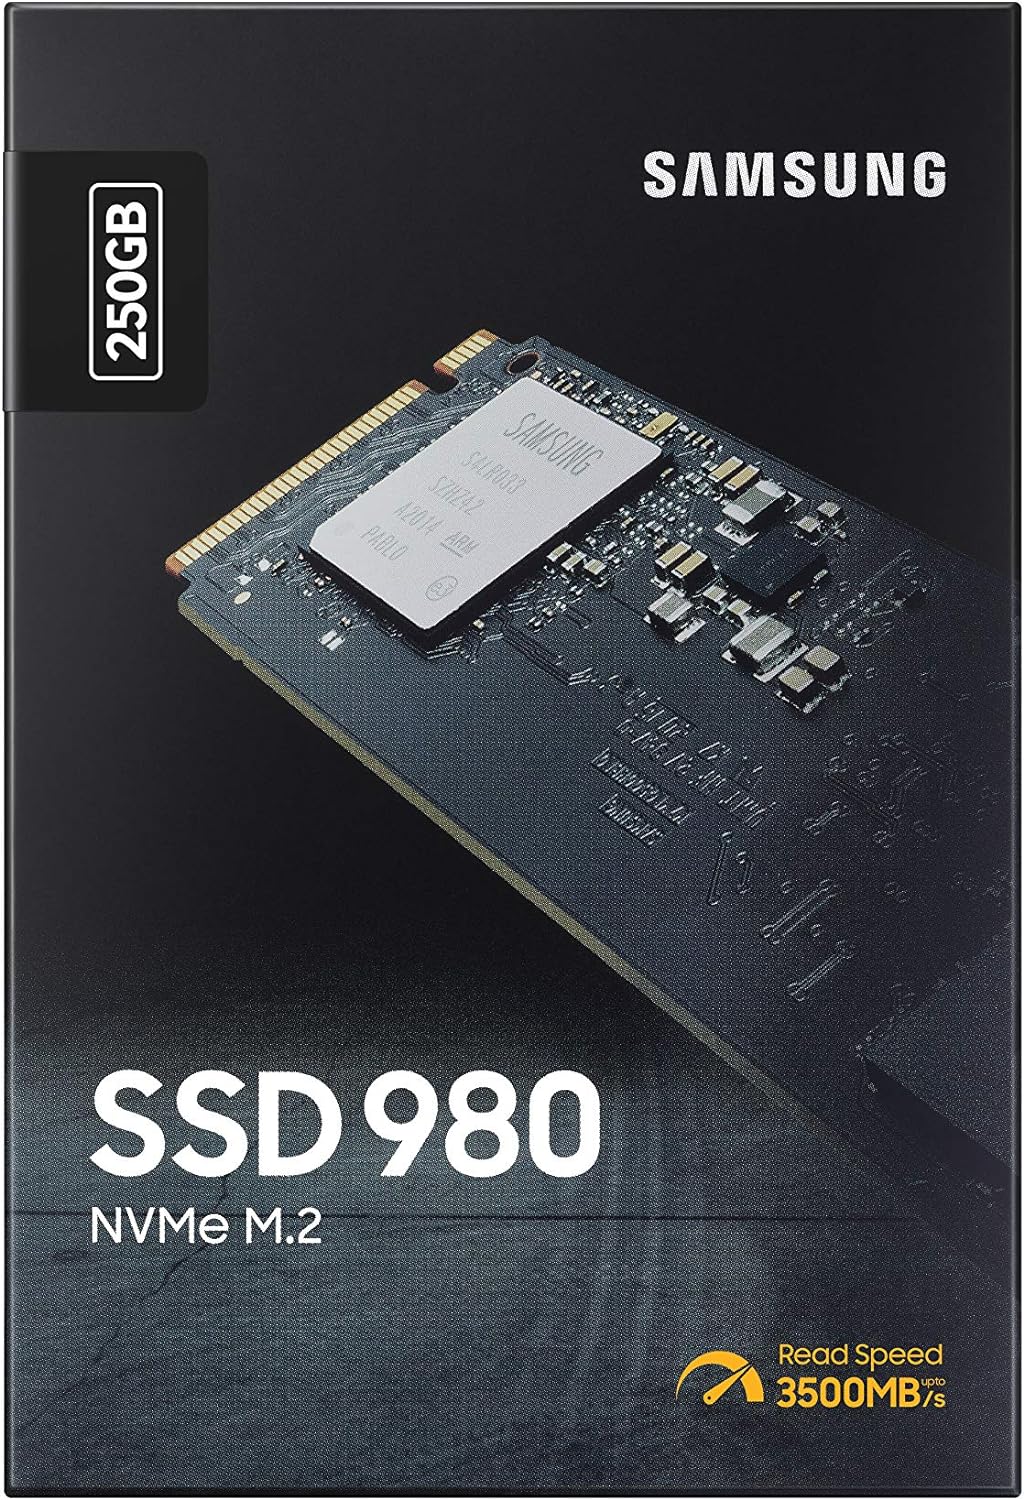 SAMSUNG 980 1TB NVMe M.2 SSD - 3500MB/s Read Speeds, Turbowrite, For PC/Laptop/Gaming